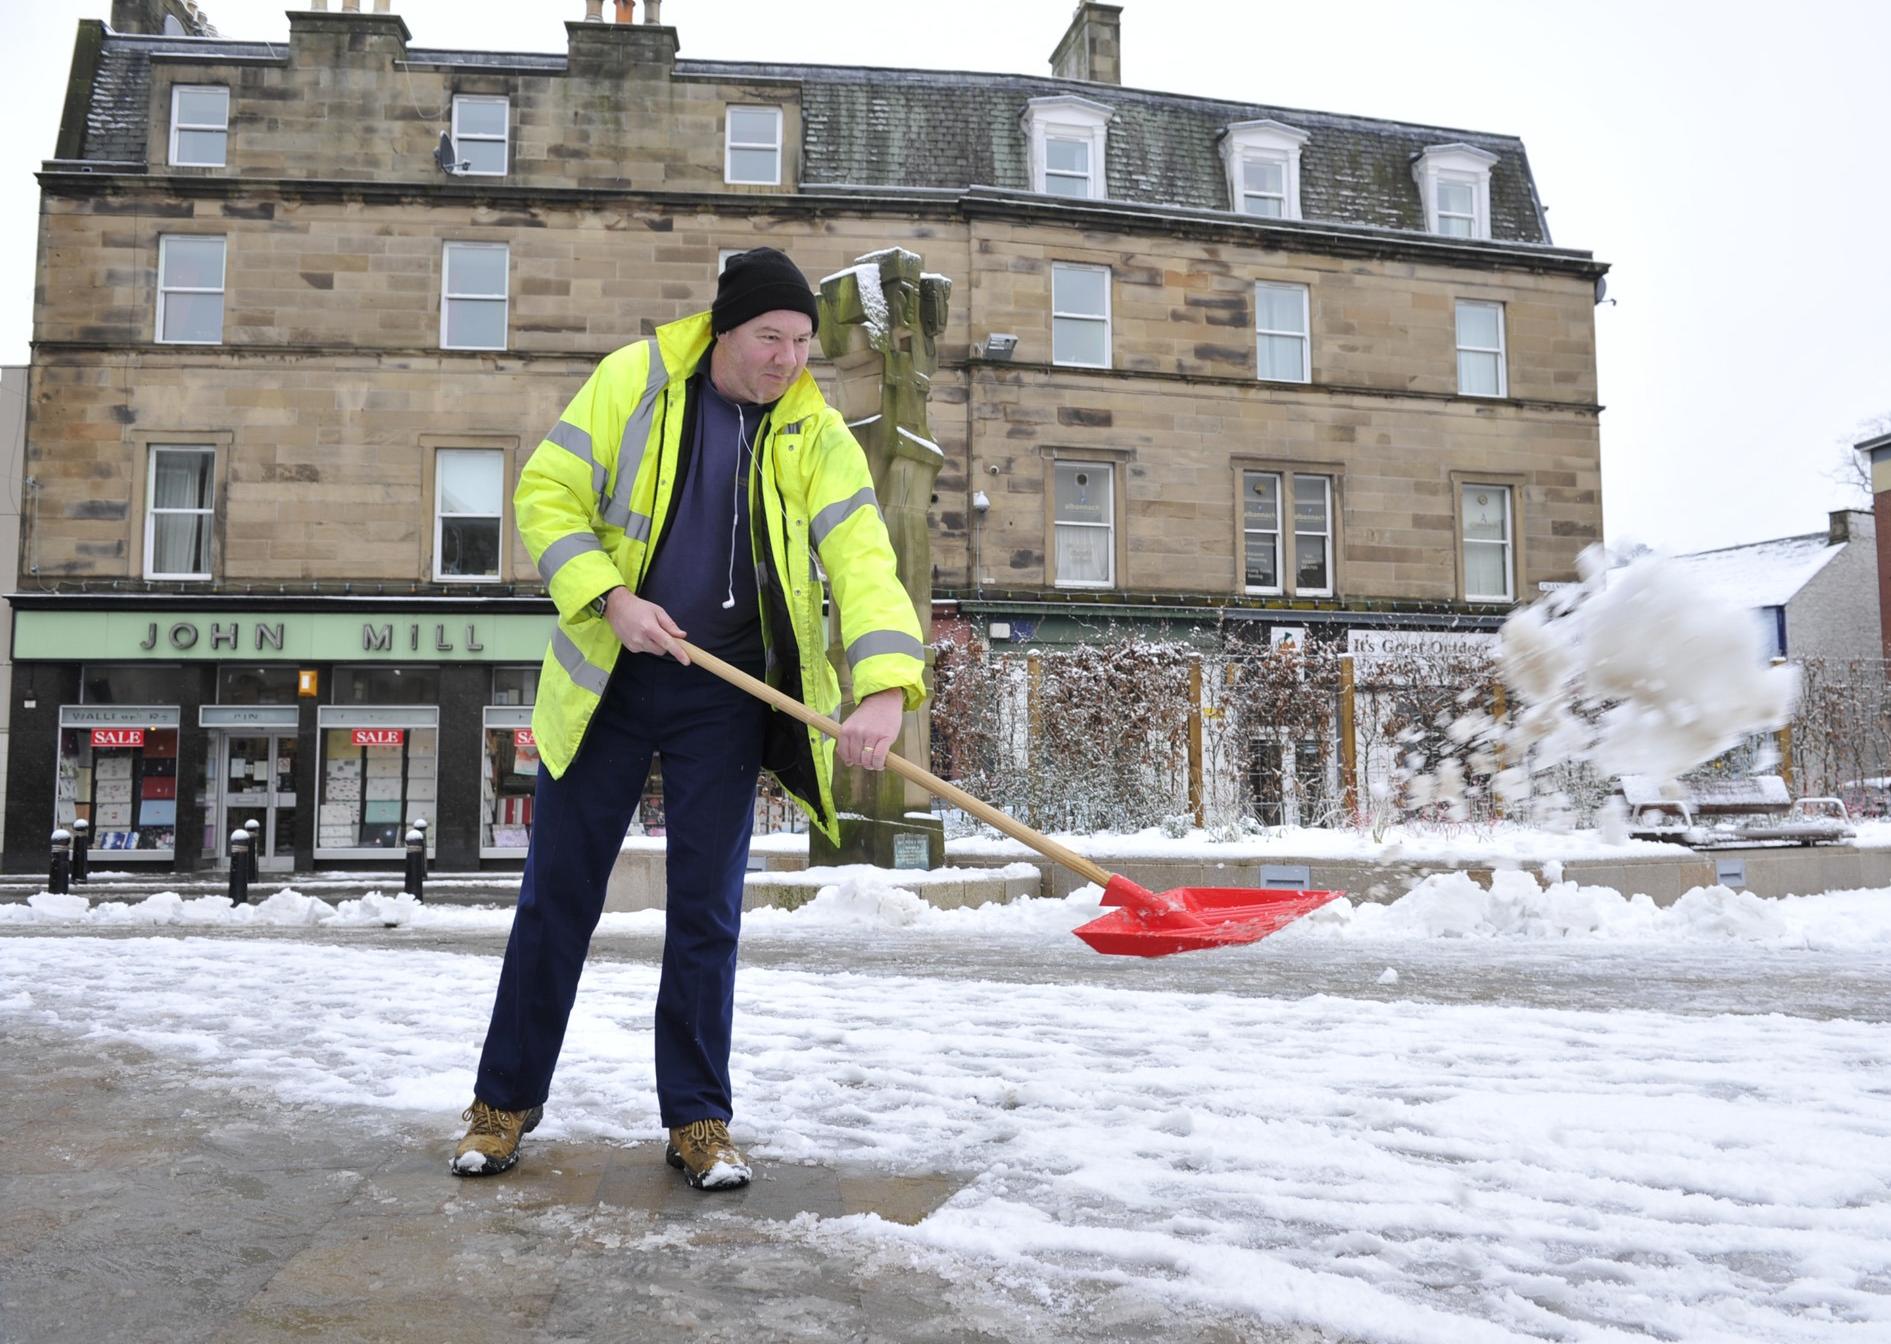 Snow being cleared in Market Square, Galashiels, Jan 2013.